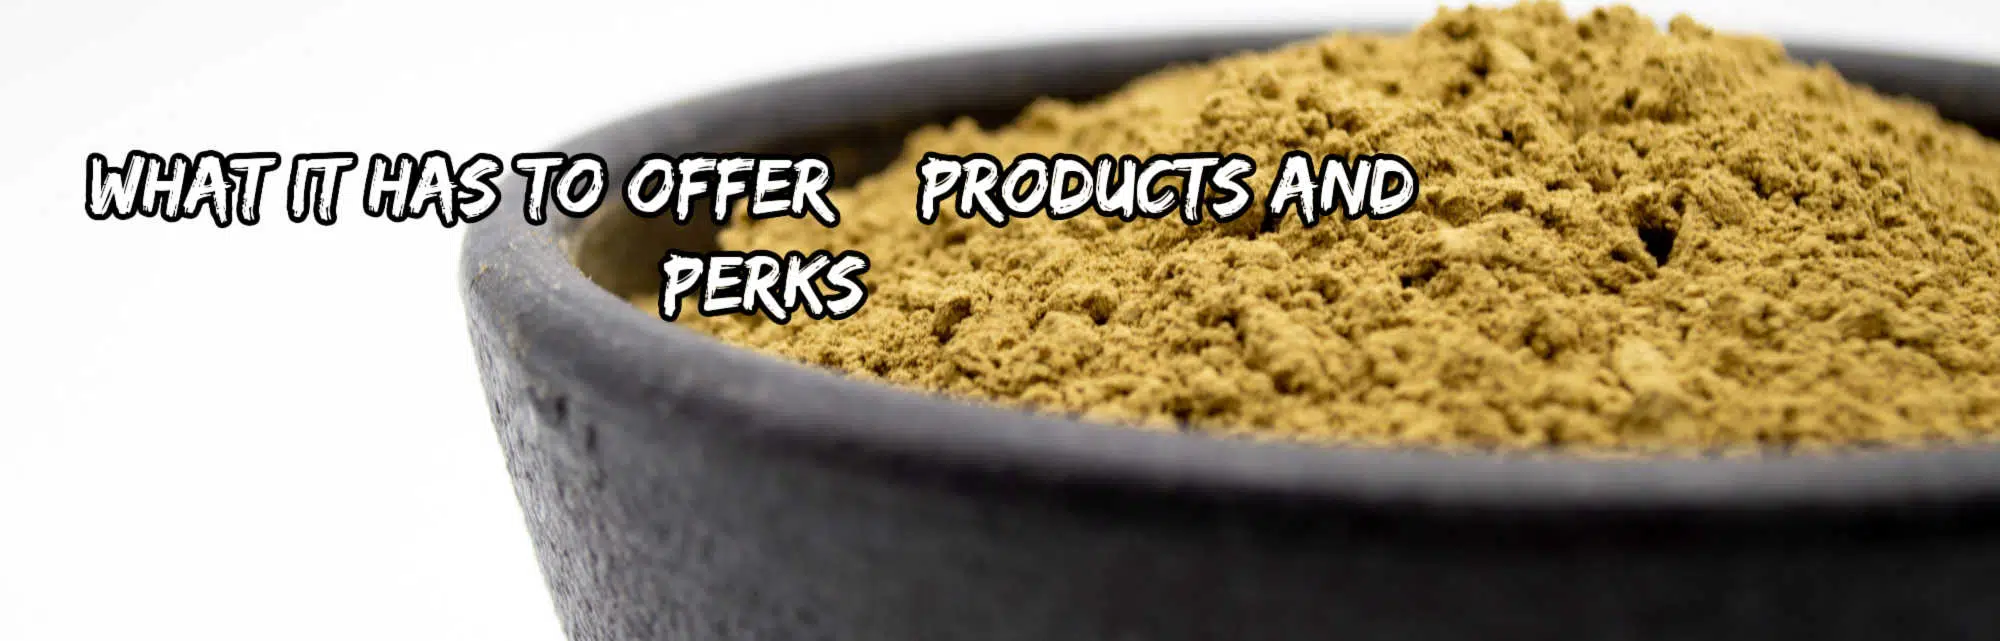 image of oregan kratom products and perks